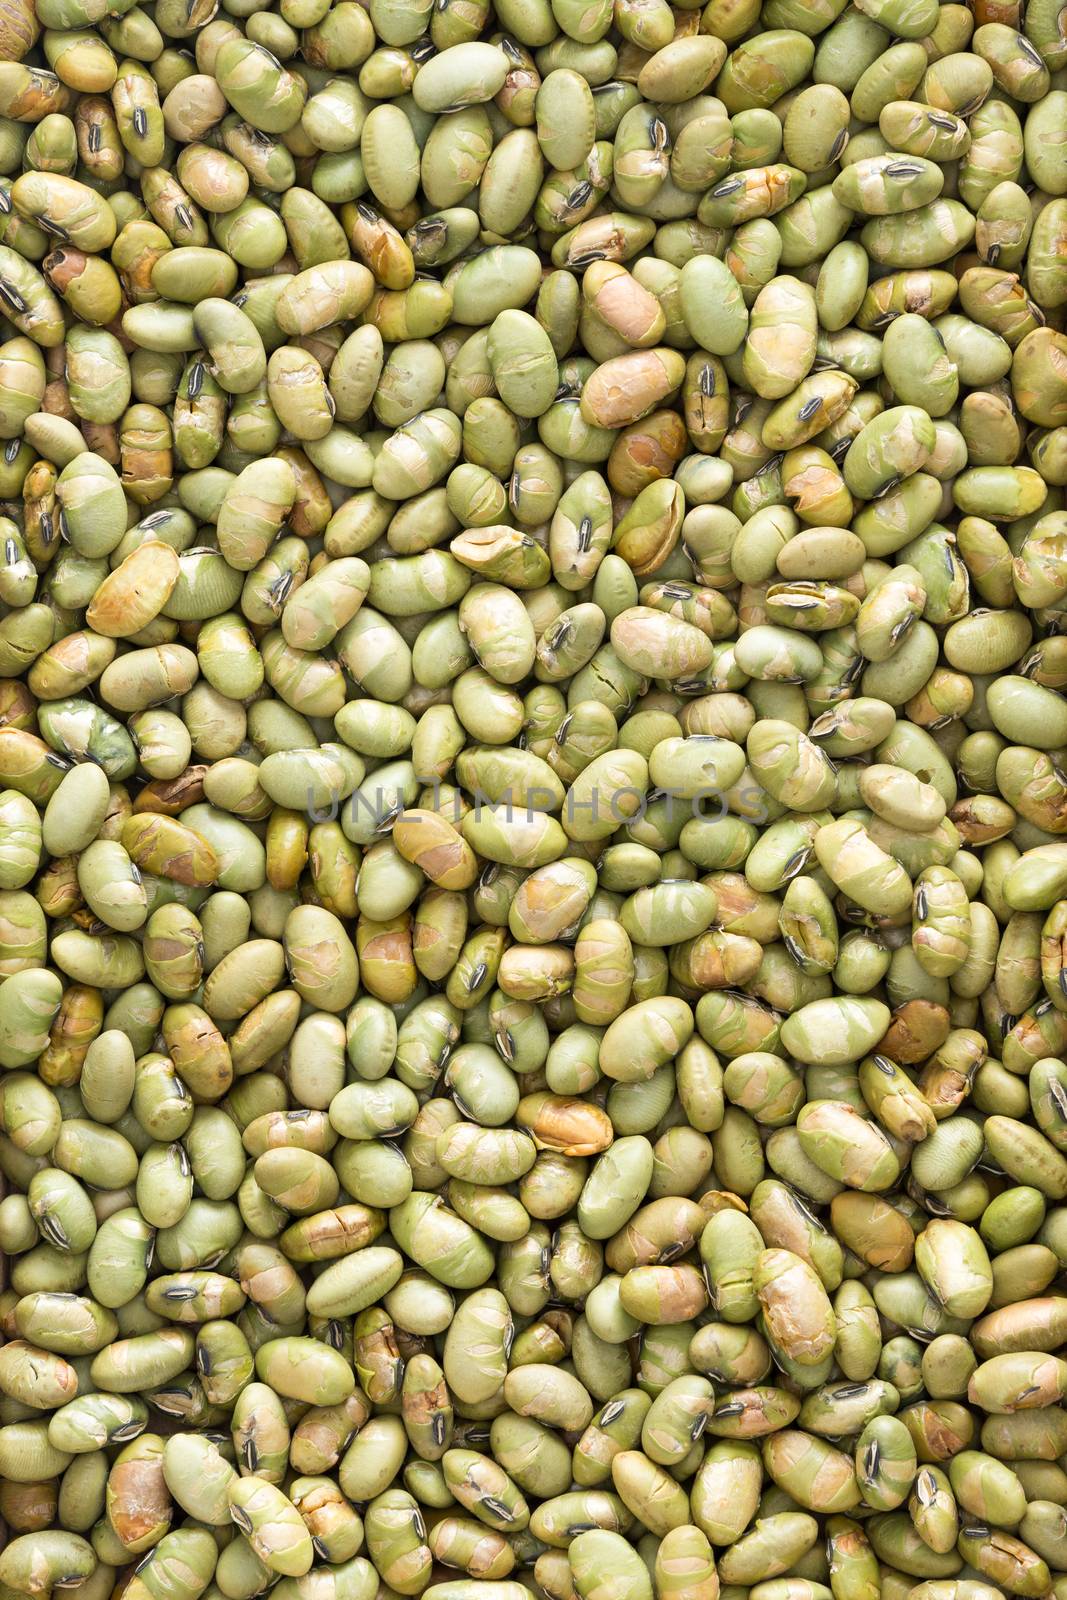 Plenty Dried Organic Edamame Bean Seeds for Wallpaper Background Design, Captured in Close up.